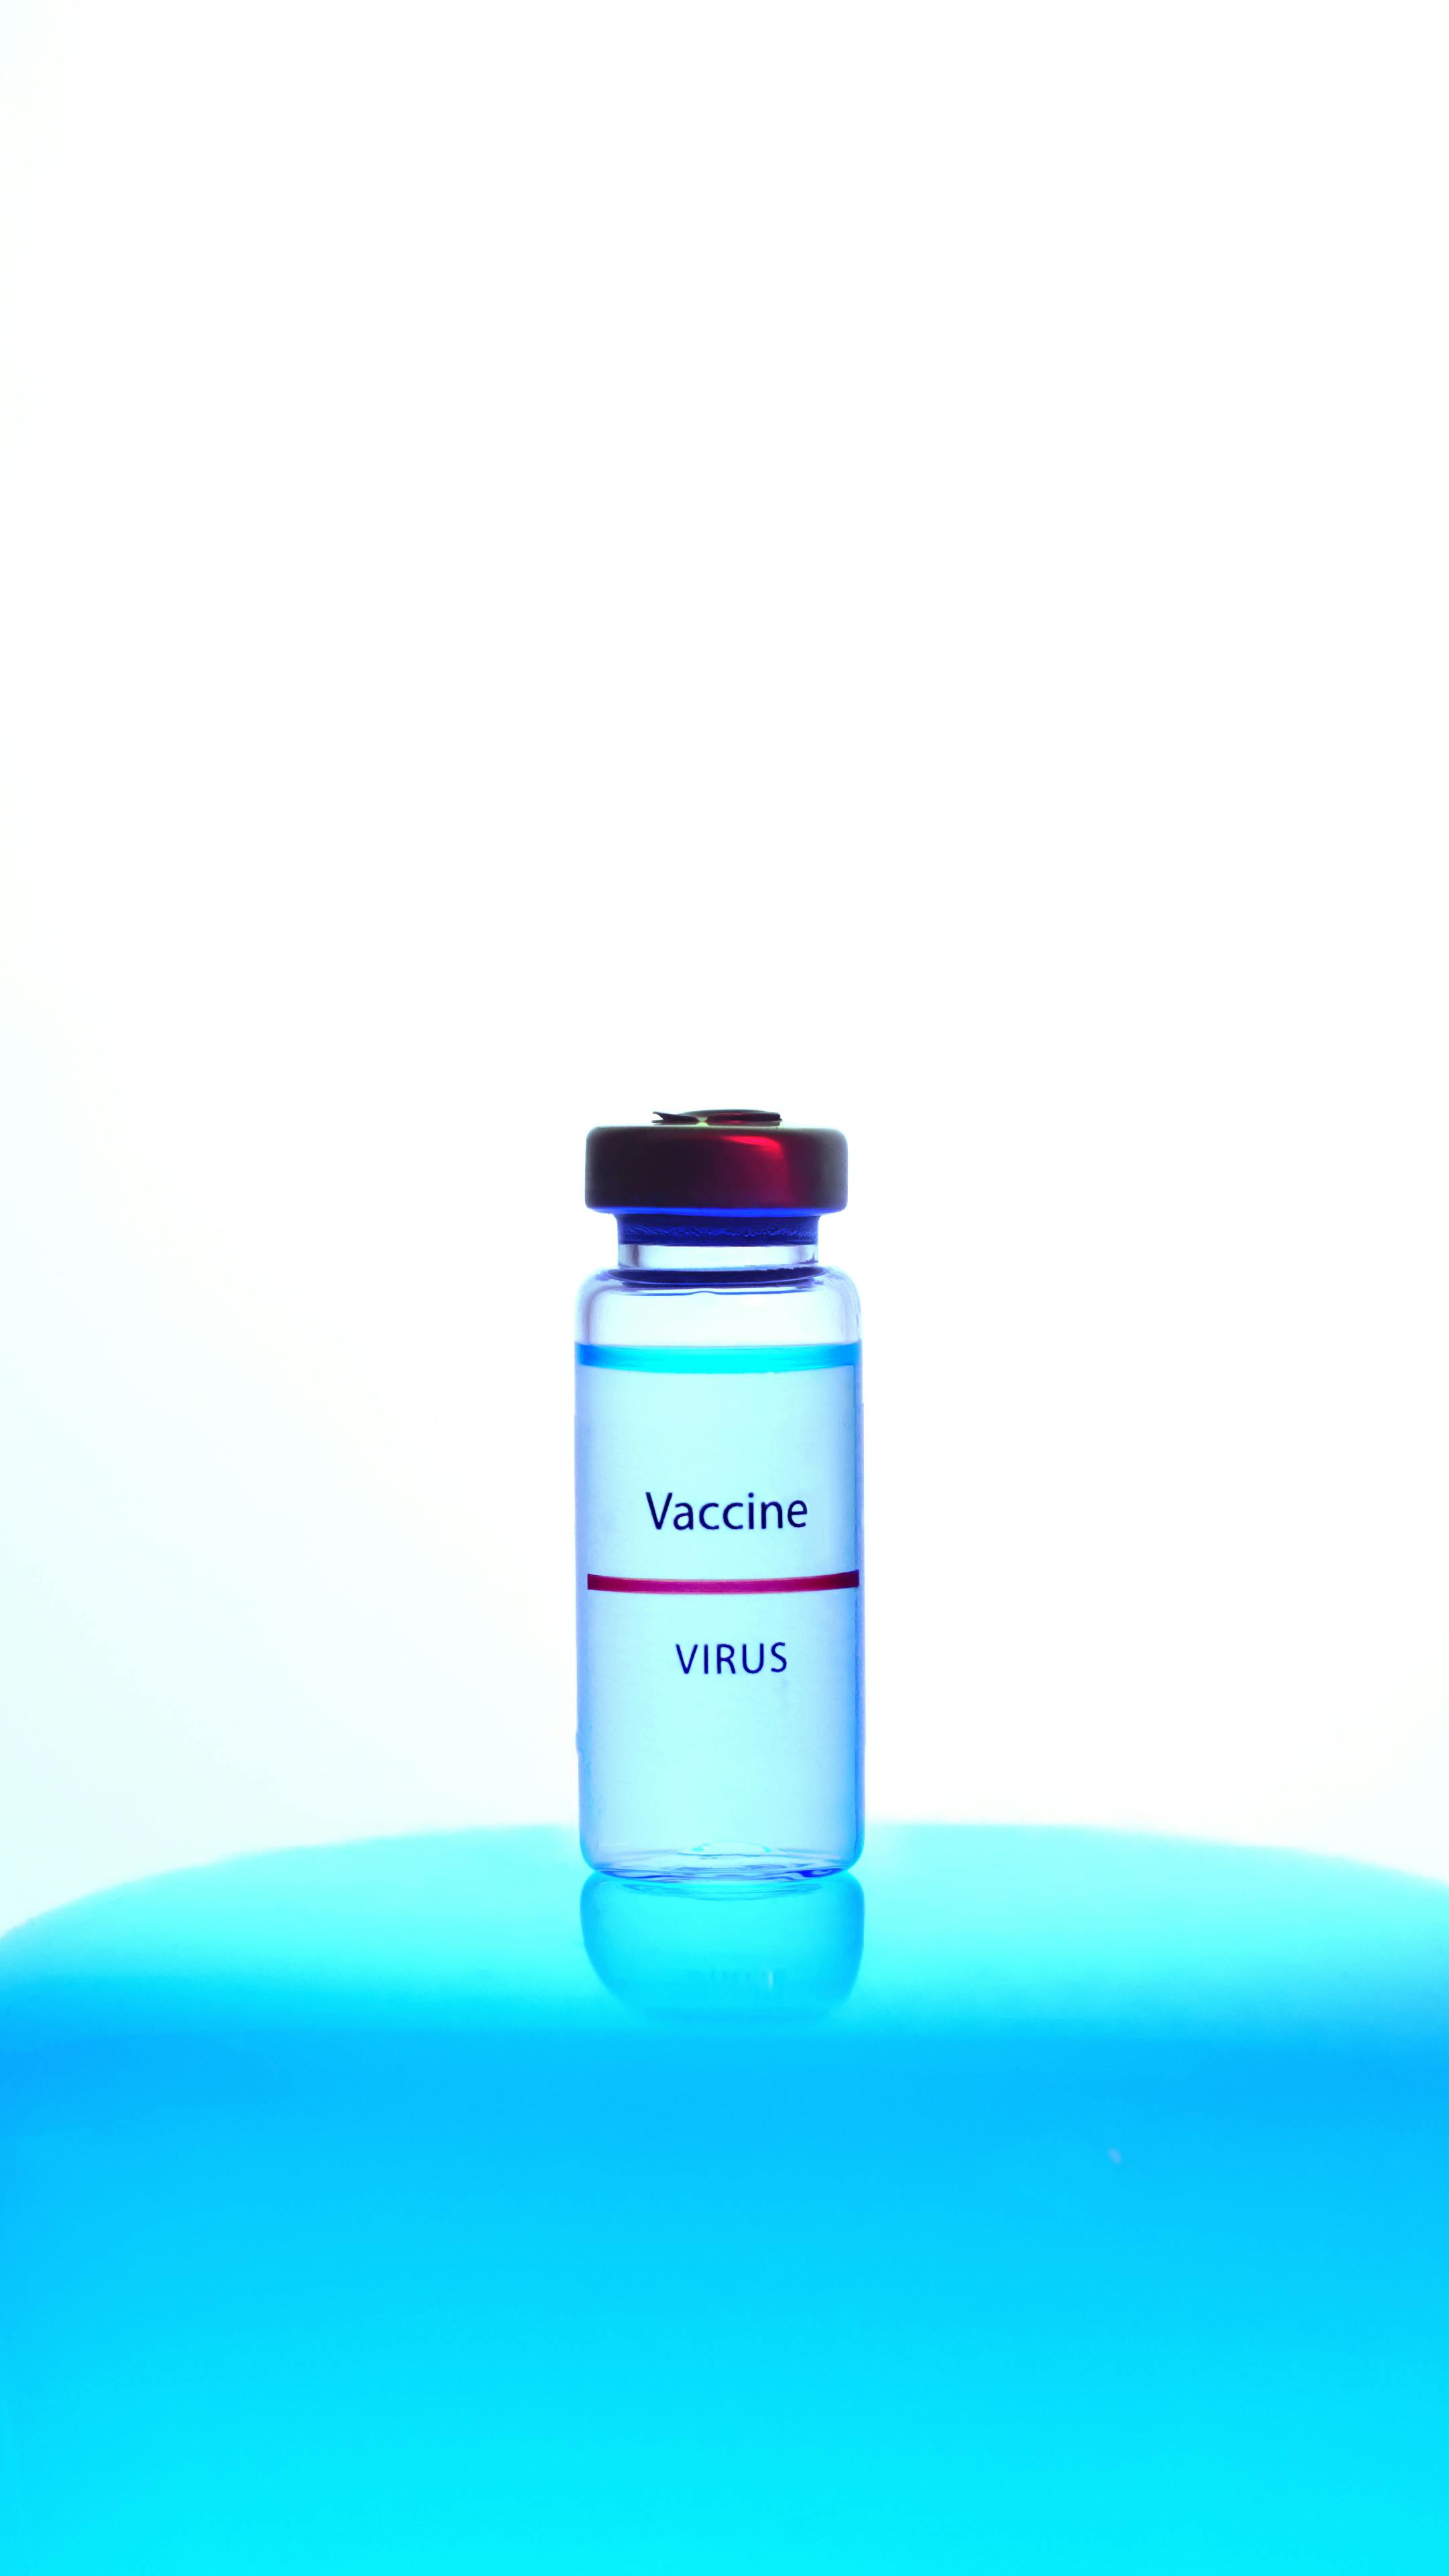 a vaccine vial on white background